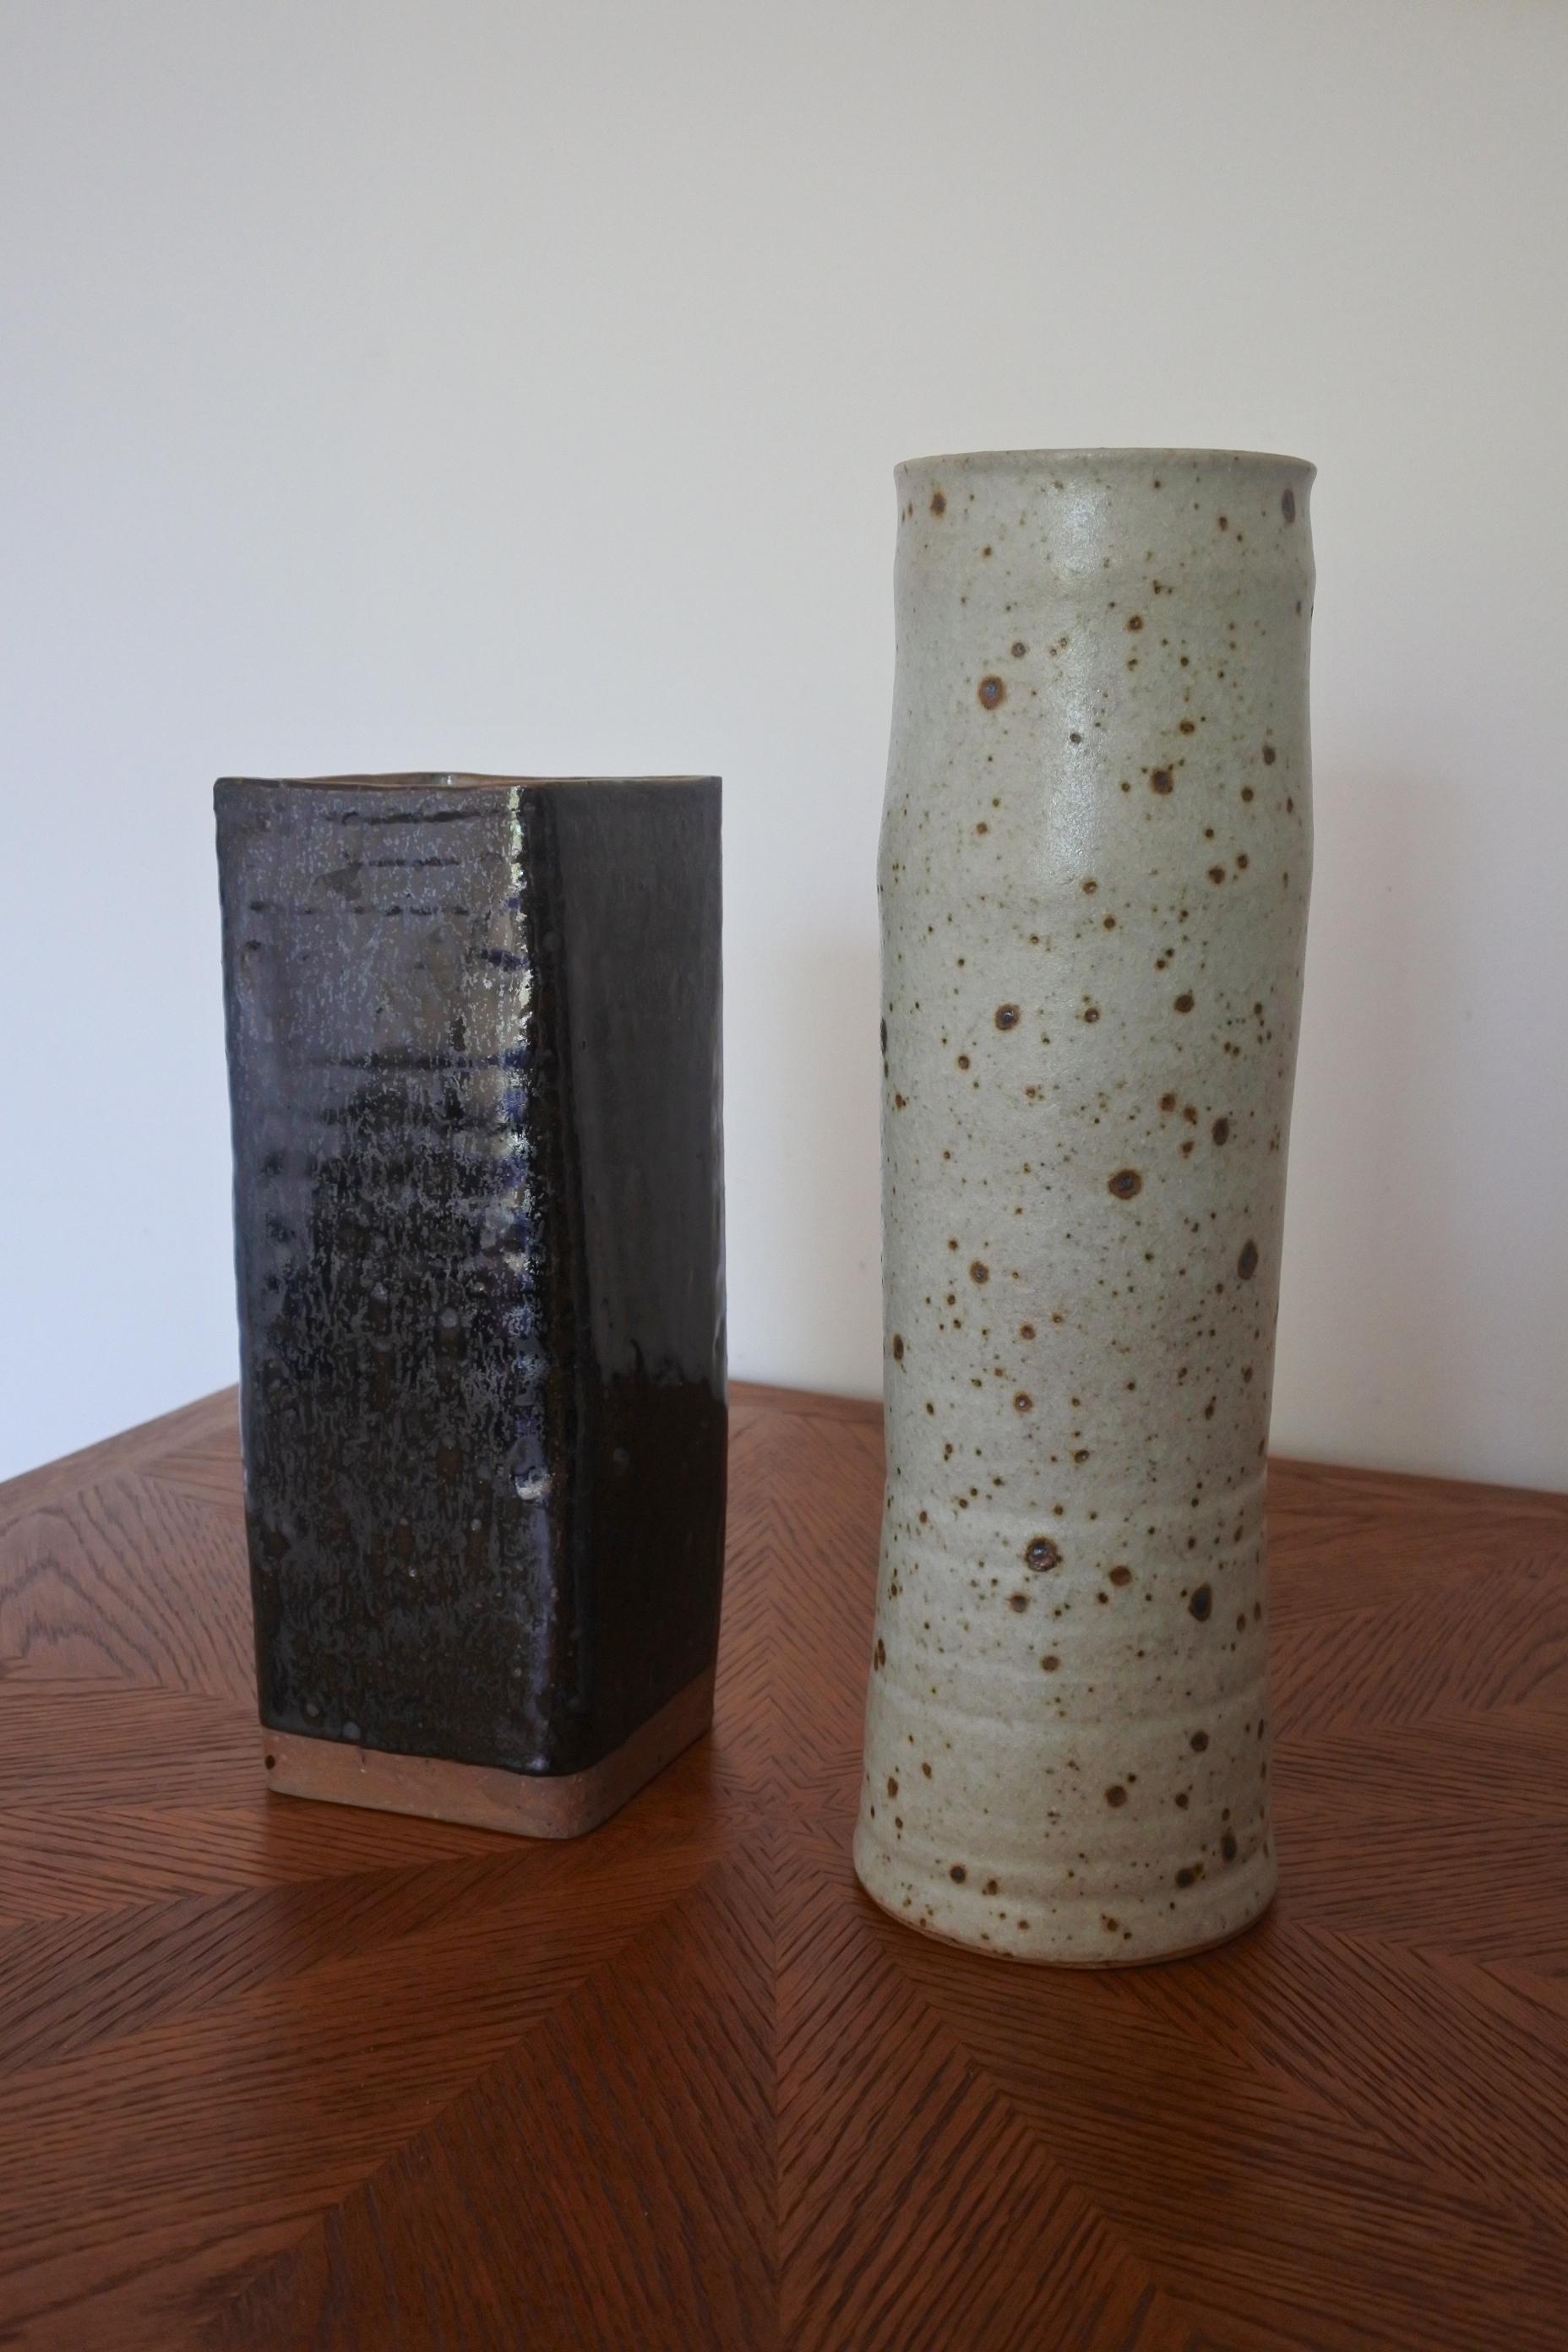 Set of two large Studio Pottery vases.
Glazed earthenware. Rich dark brown crystallised glaze for the square shaped one, thick grey salt glaze for the cylinder shaped one, in the manner of La Borne, France.
Made in France in the 1960s.
Both